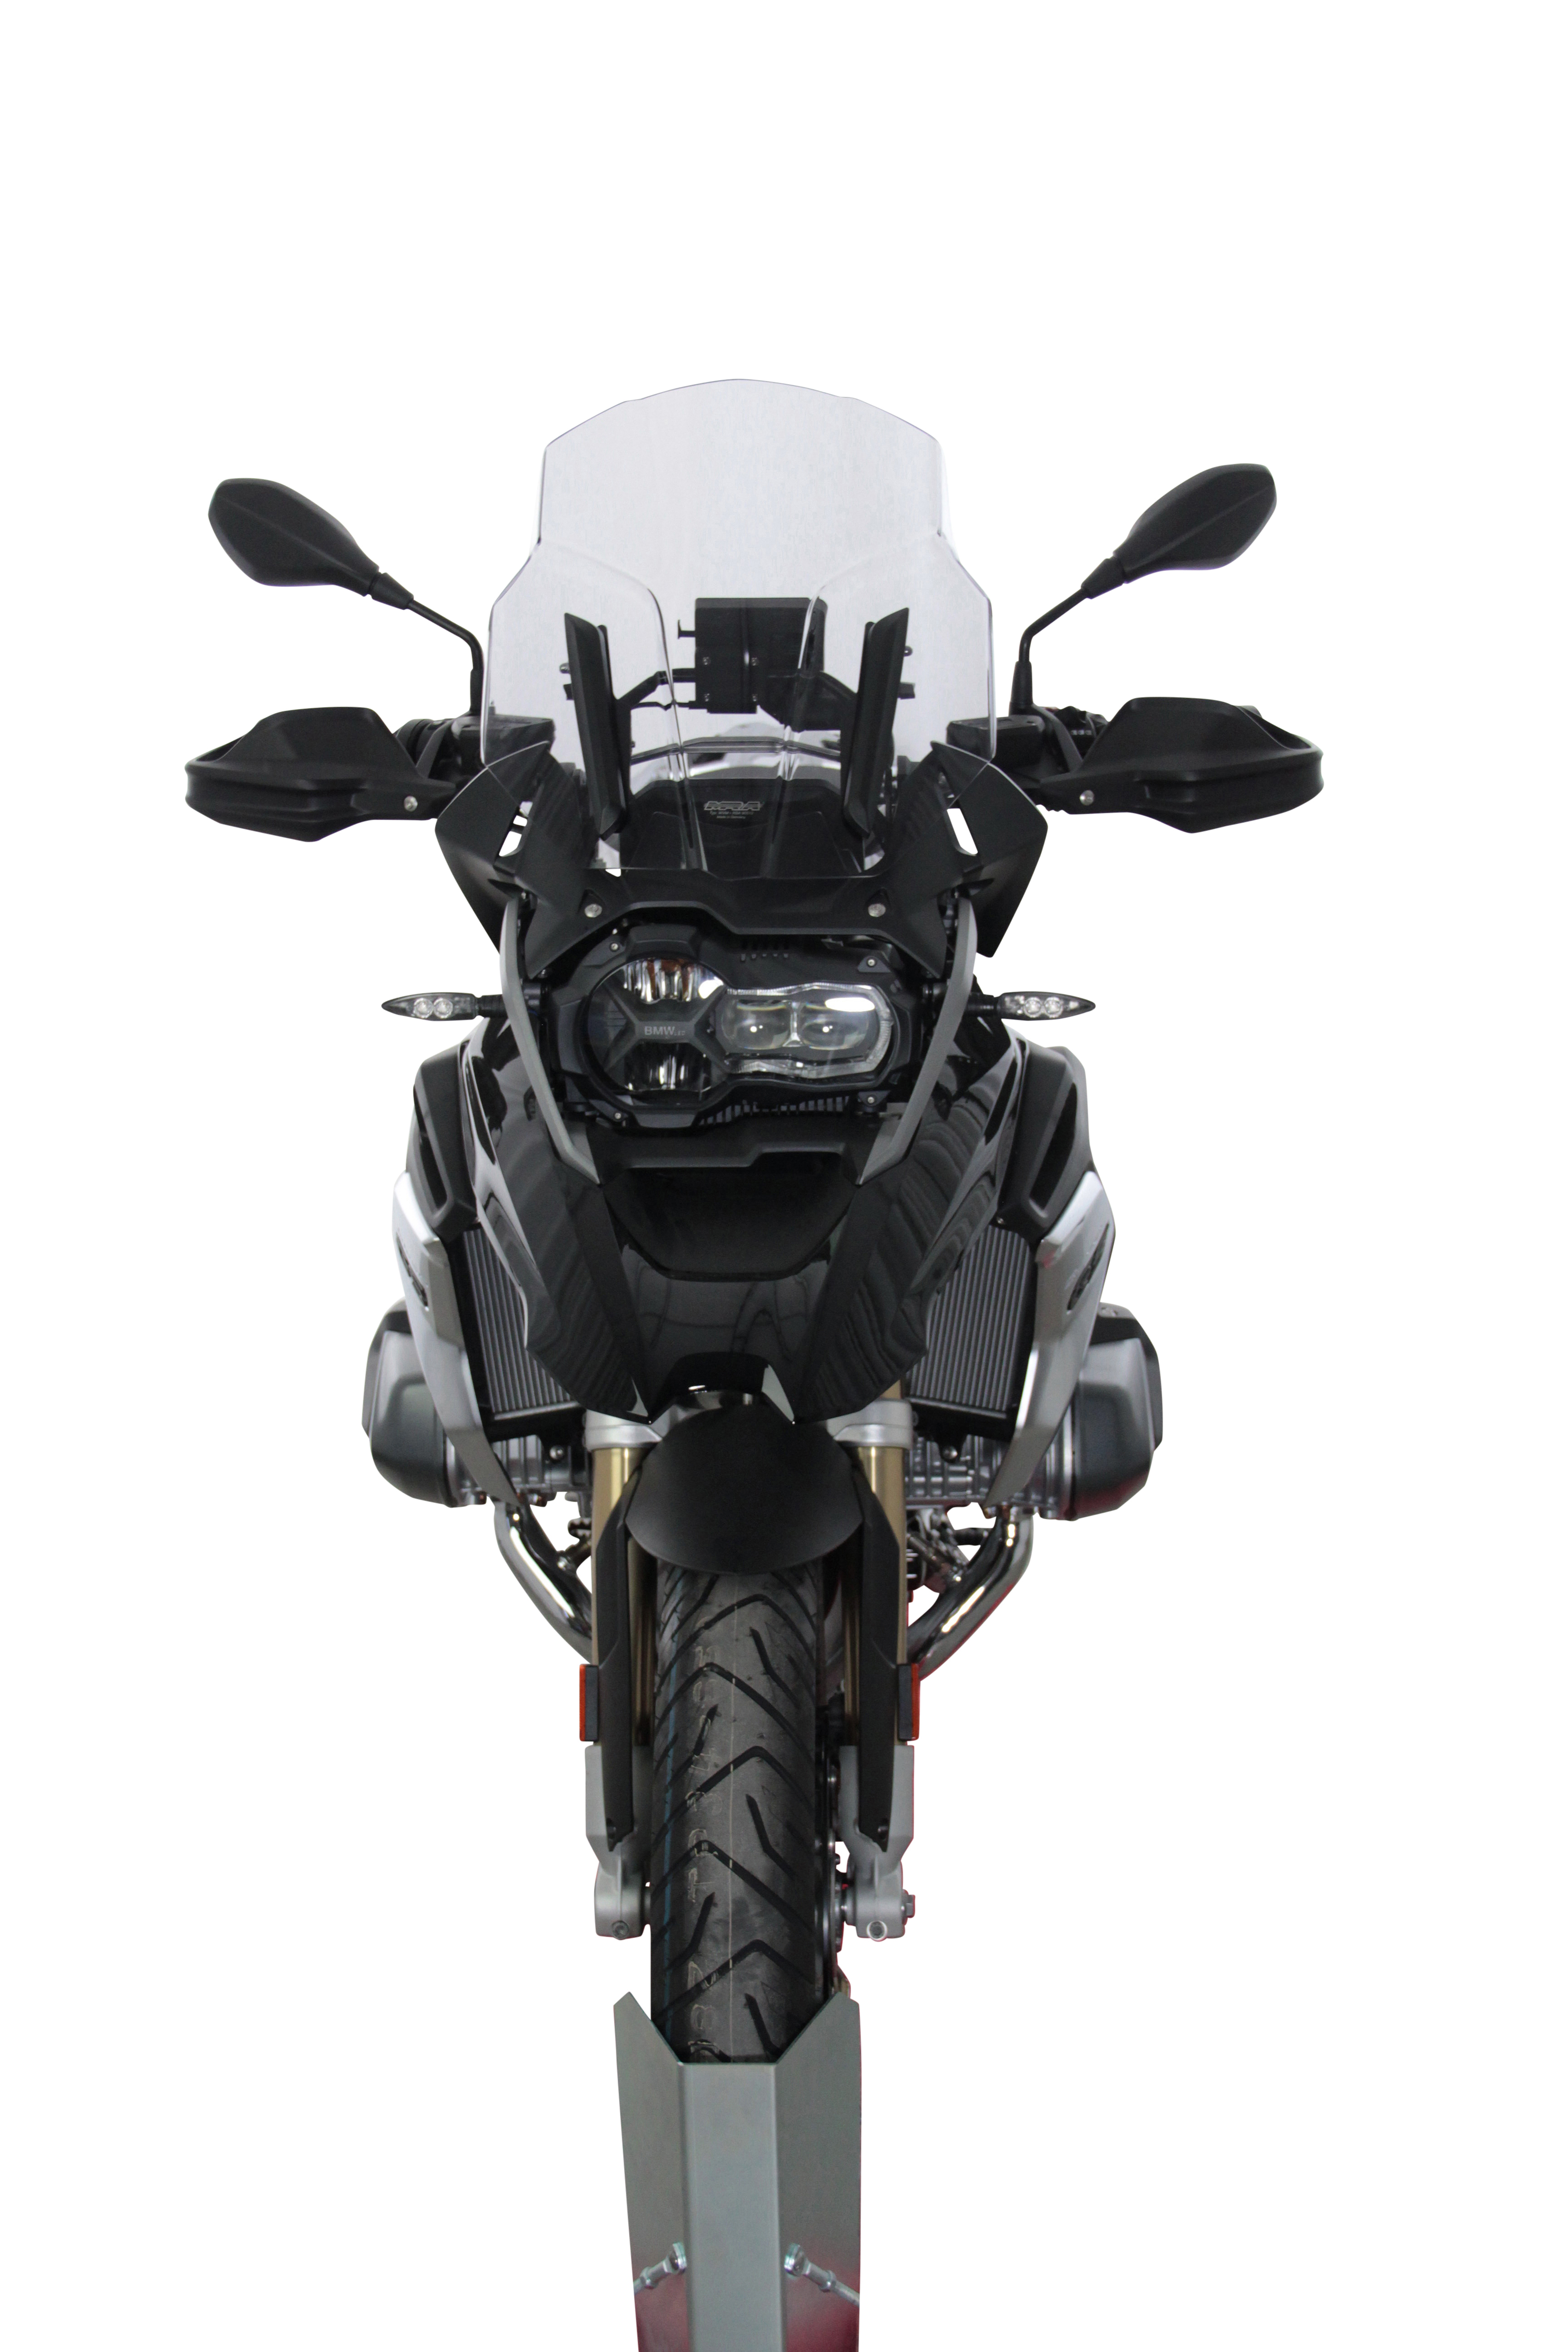 R 1250 GS Adventure, BMW, Model-based products